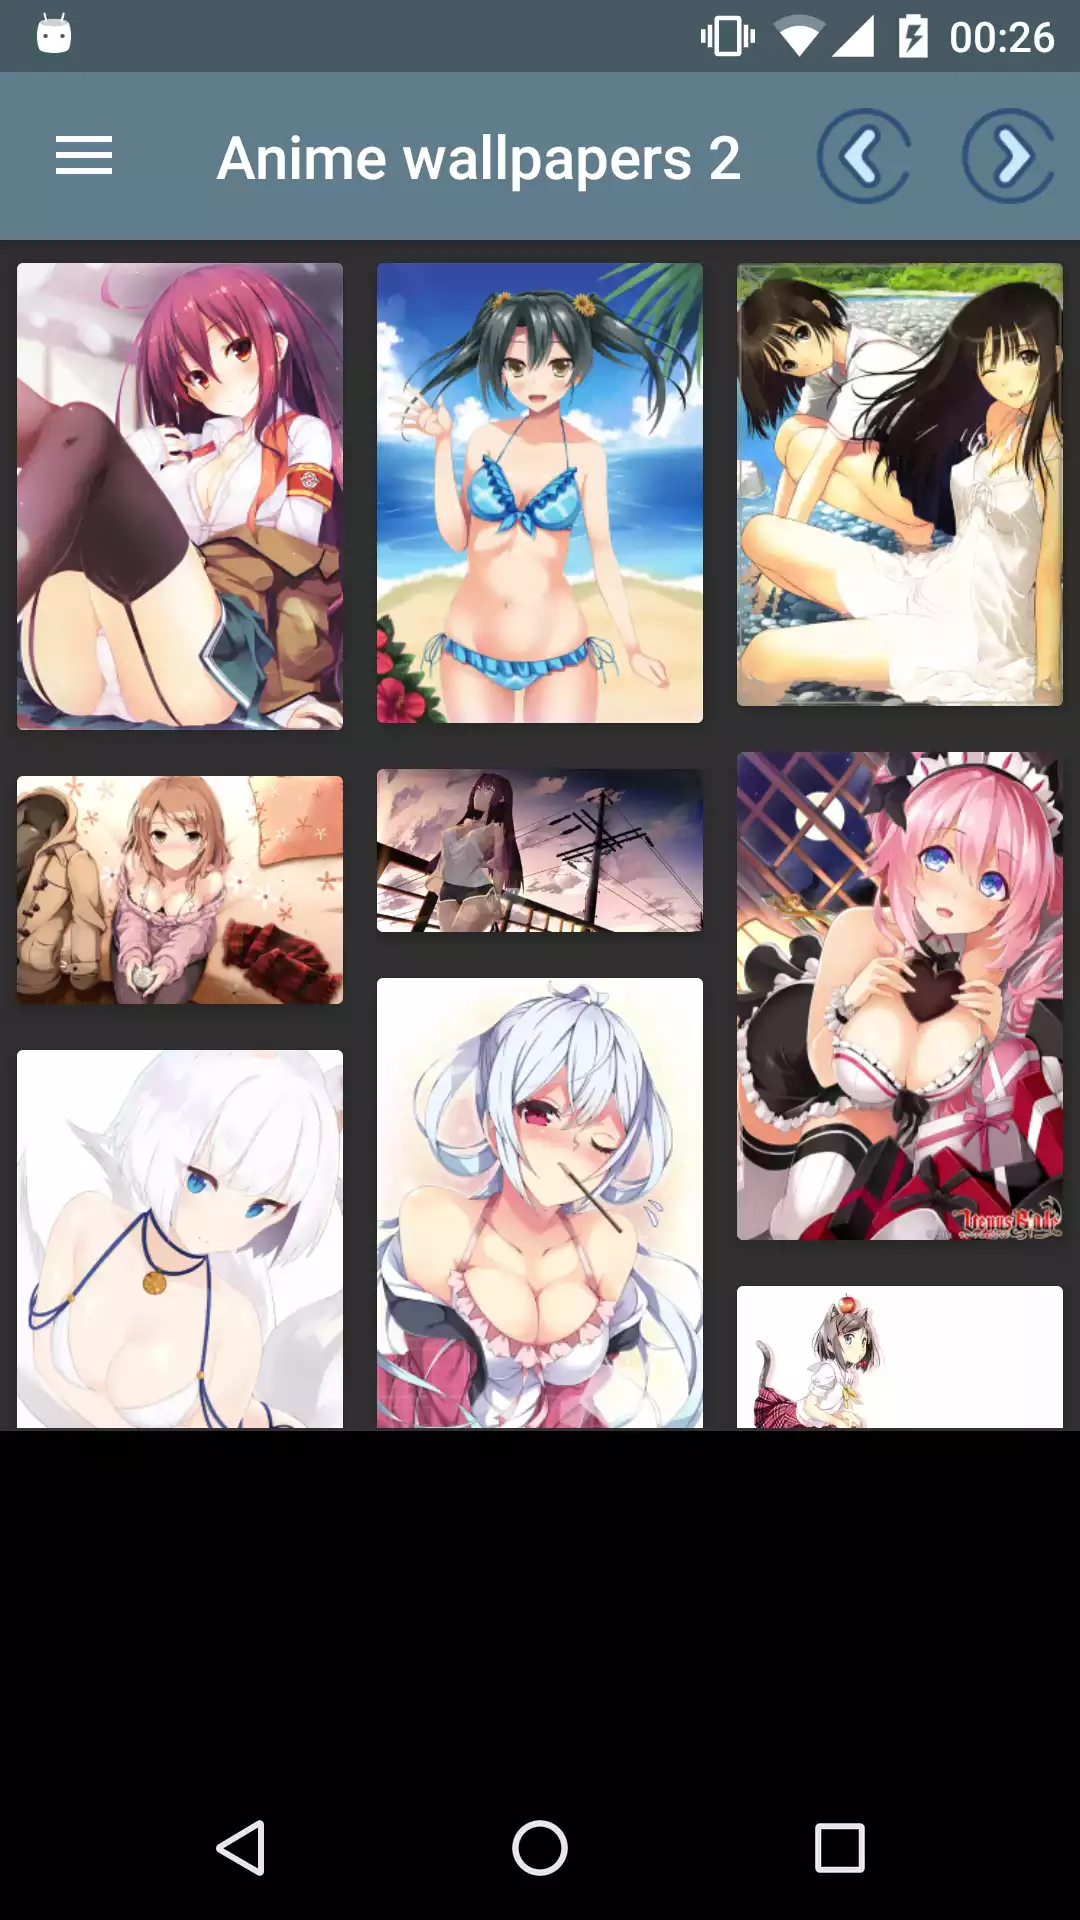 Sexy Anime Wallpapers hentai,wallpapers,download,app,drawings,titty,japan,panties,hot,apk,mod,tuesday,adult,images,and,henti,asian,sexy,anime,mobile,picture,porn,puzzles,android,apps,photos